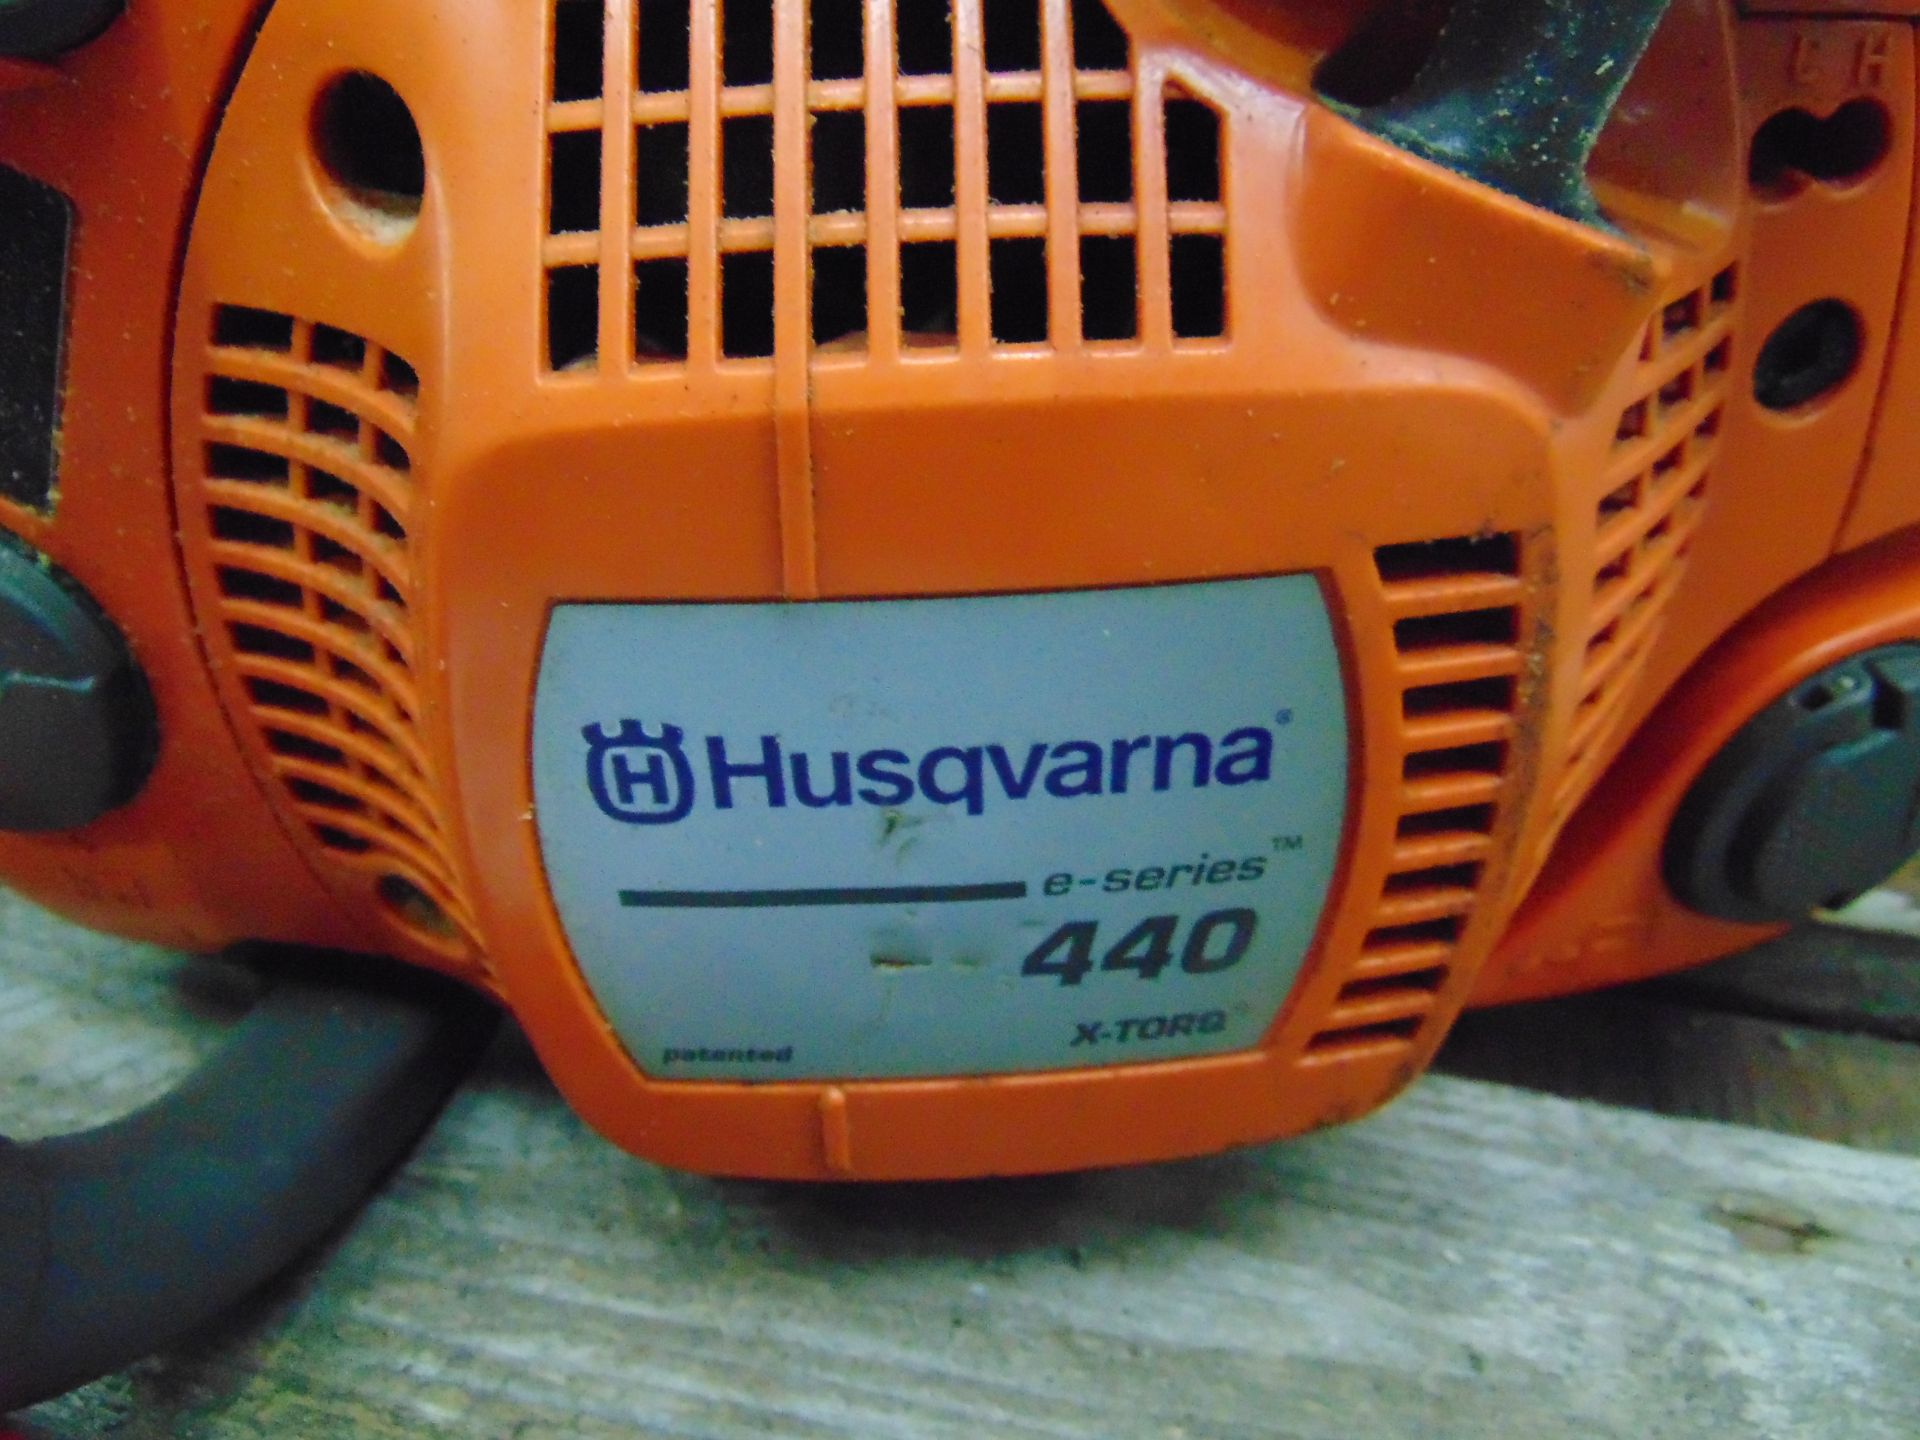 Husqvarna 440 Chainsaw C/W Protective Eqpt inc Trousers, Helmet, Gloves and Boots - Image 3 of 7